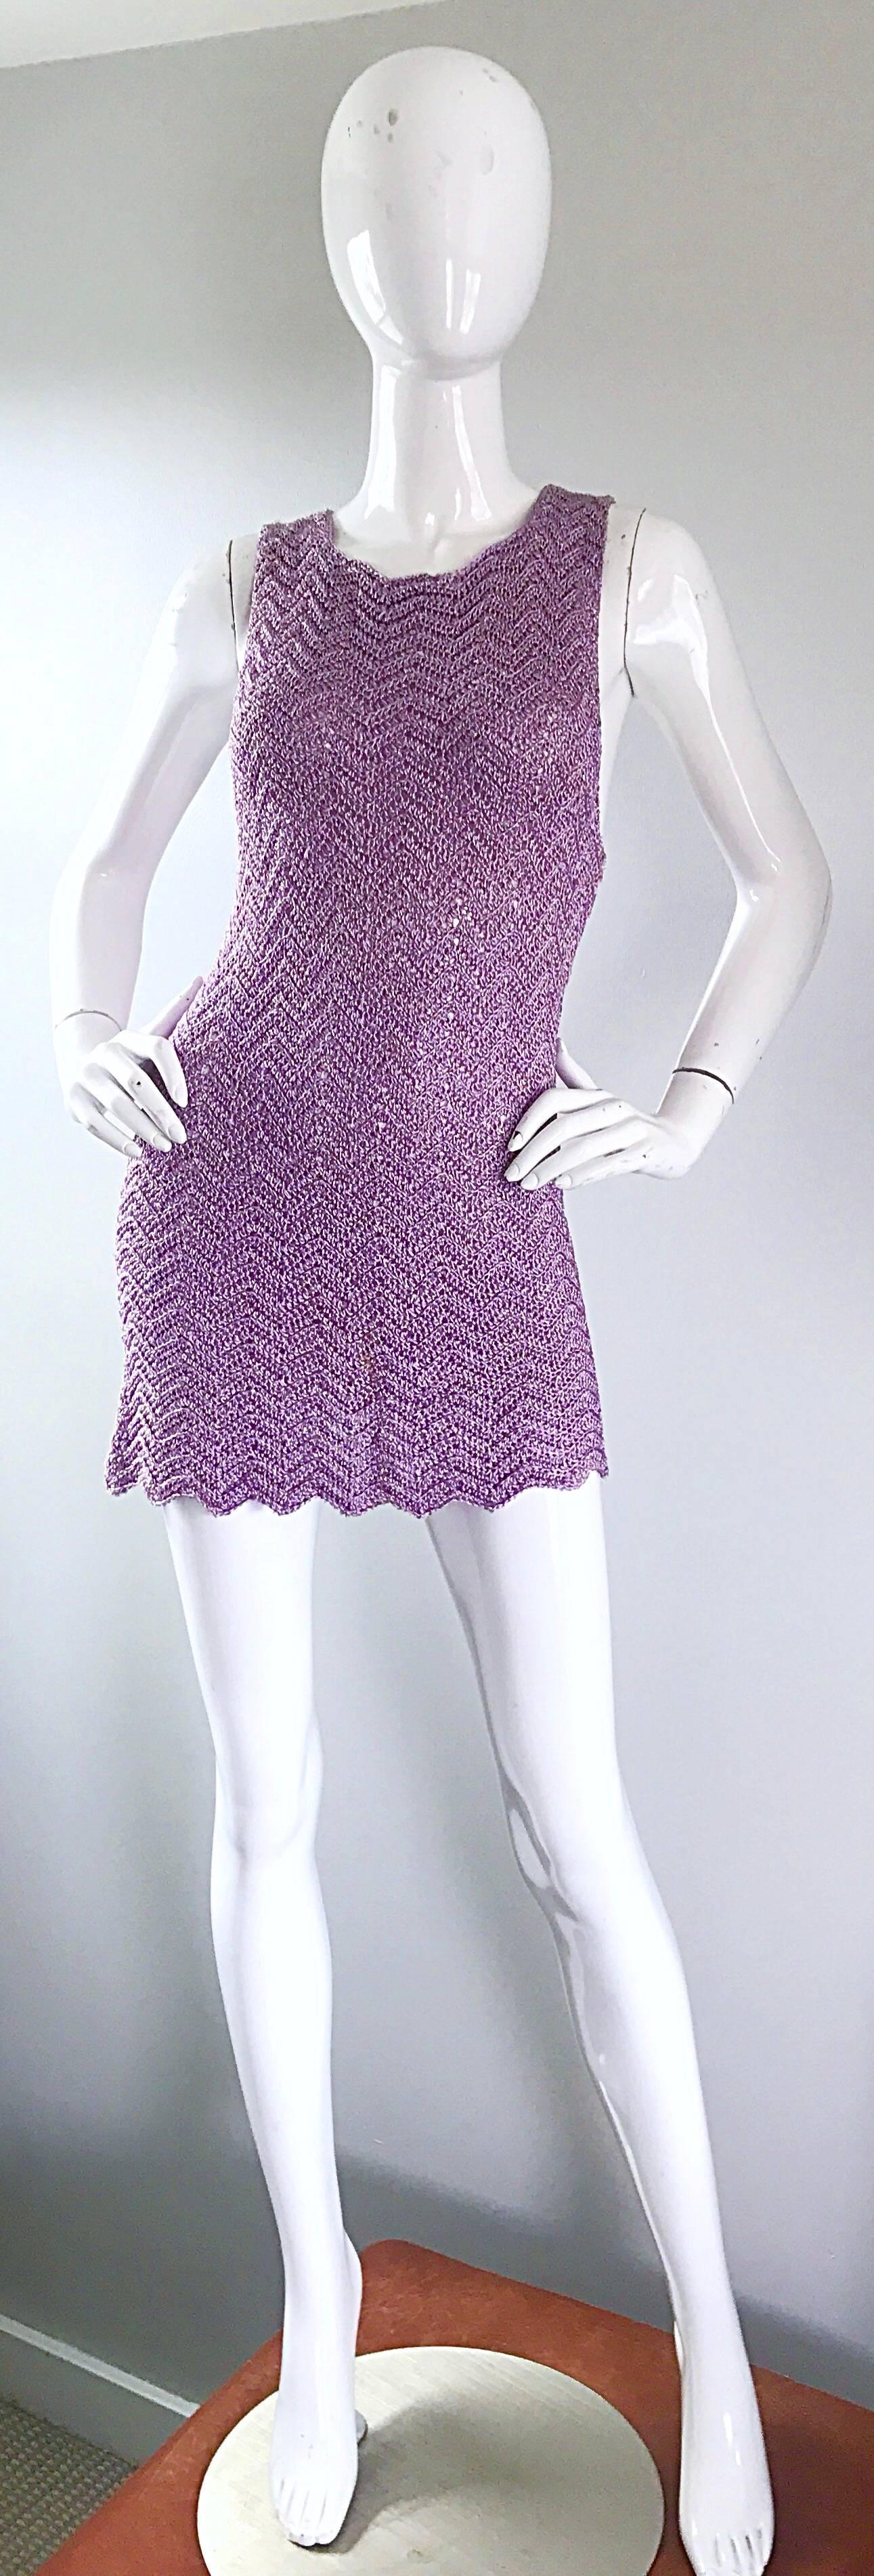 Sexy 90s ISAAC MIZRAHI for BERGDORF GOODMAN light purple lavender and gold crochet mini dress! Features a seductive low cut sleeve. Simple slips over to head. Hand crochet rayon features gold silk thread intertwined throughout, and is super soft